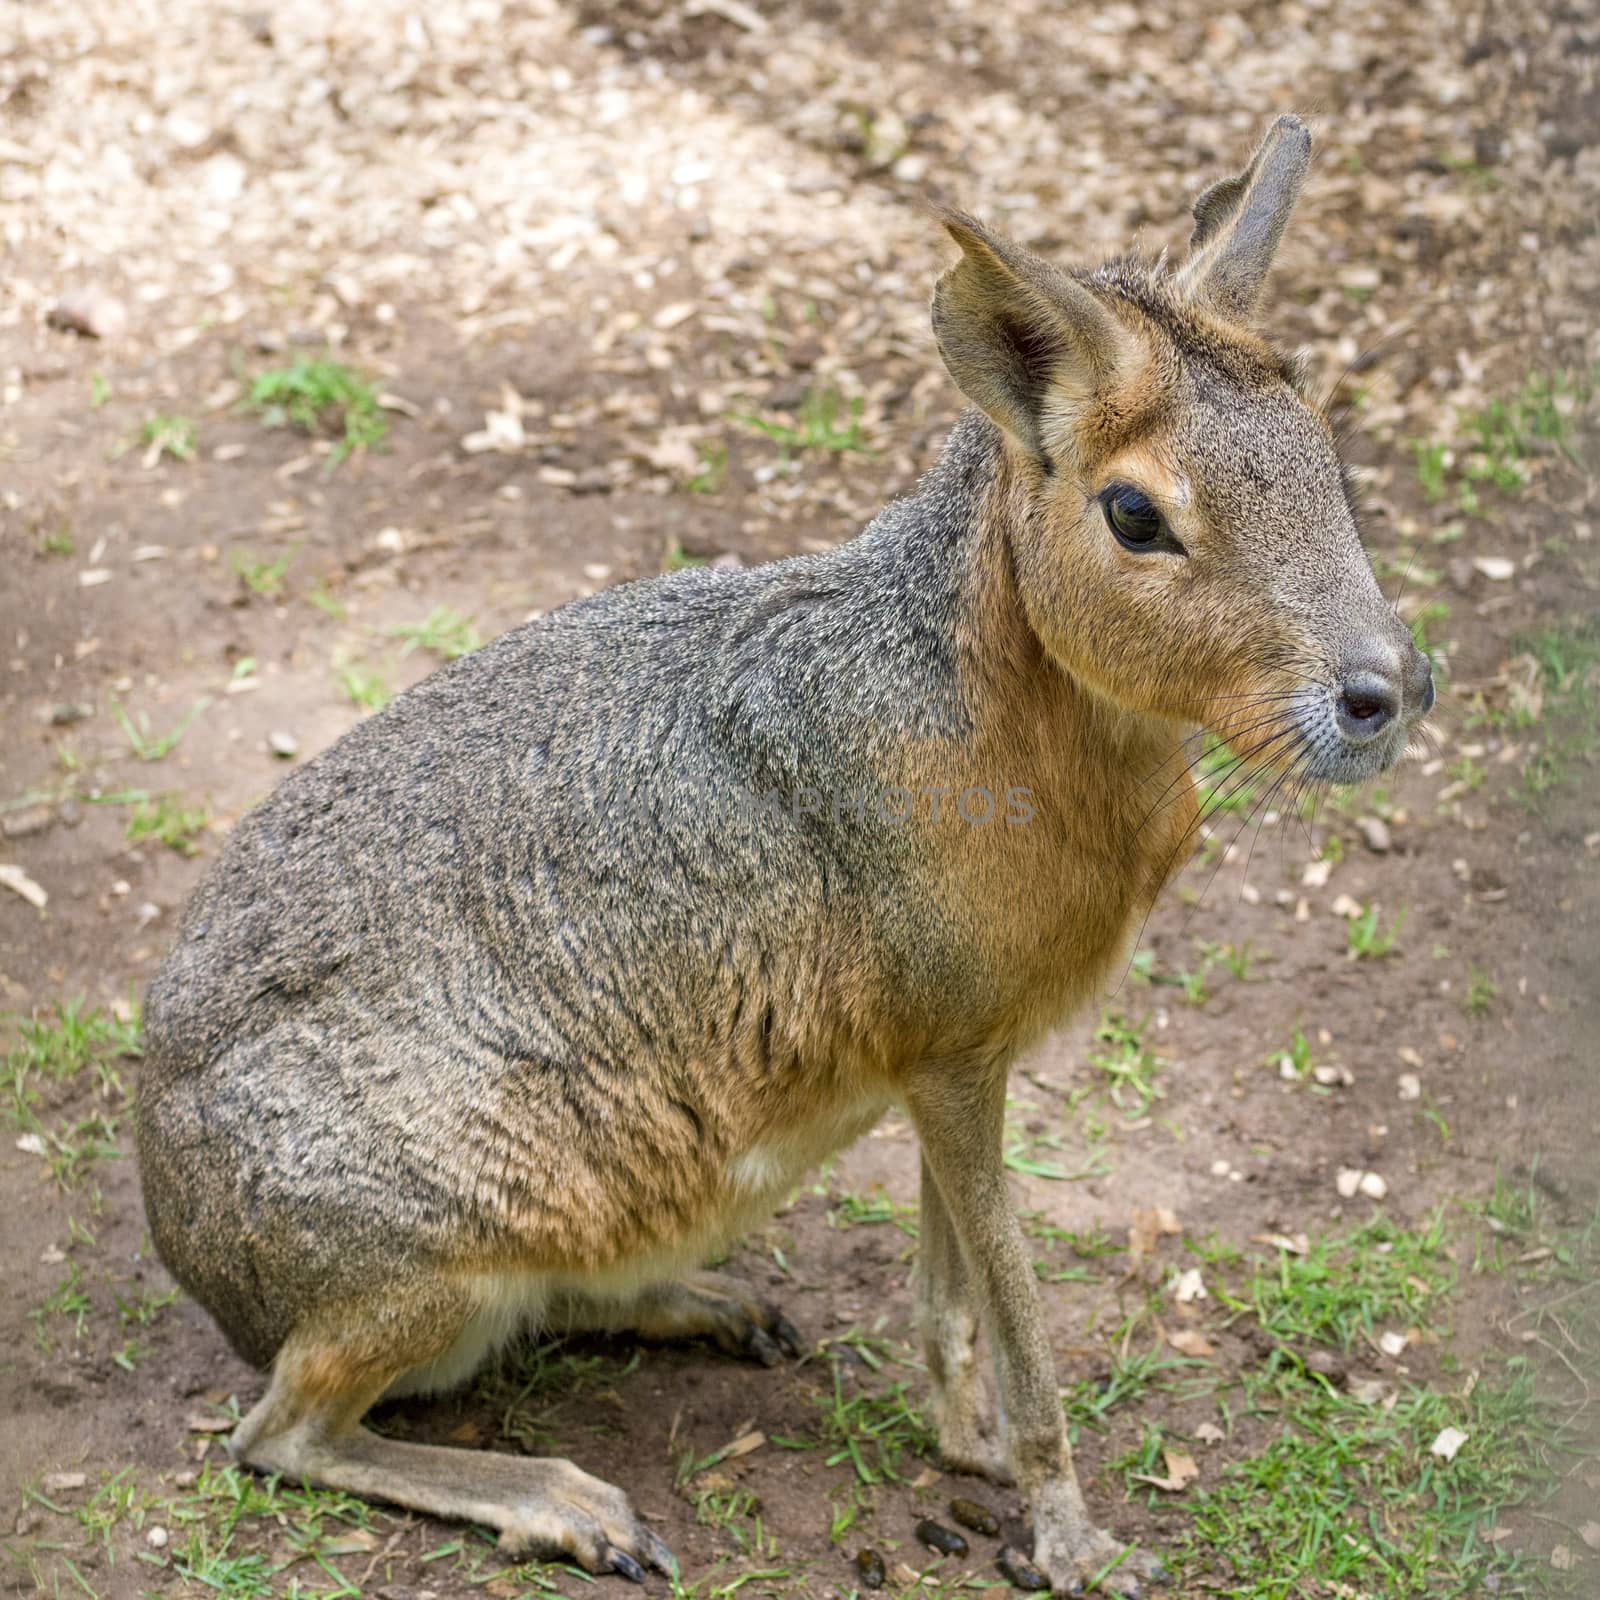 Patagonian mara - Dolichotis patagonum, big rodent, relative of guinea pig, common in Patagonian steppes of Argentina, South America